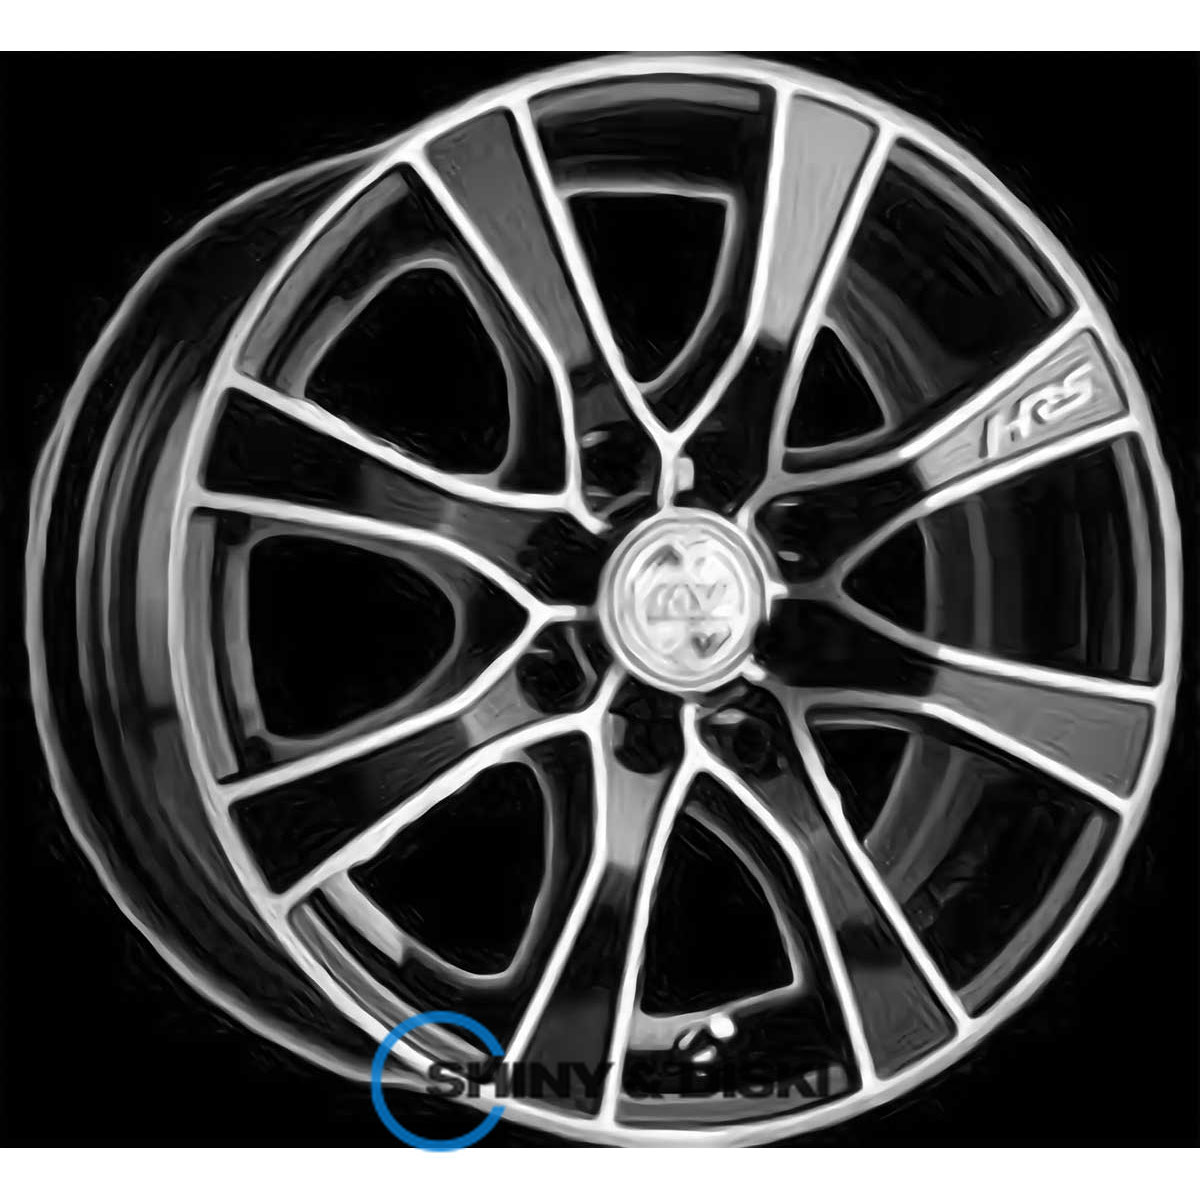 rs tuning h-476 bkfp r13 w5.5 pcd4x98 et38 dia58.6